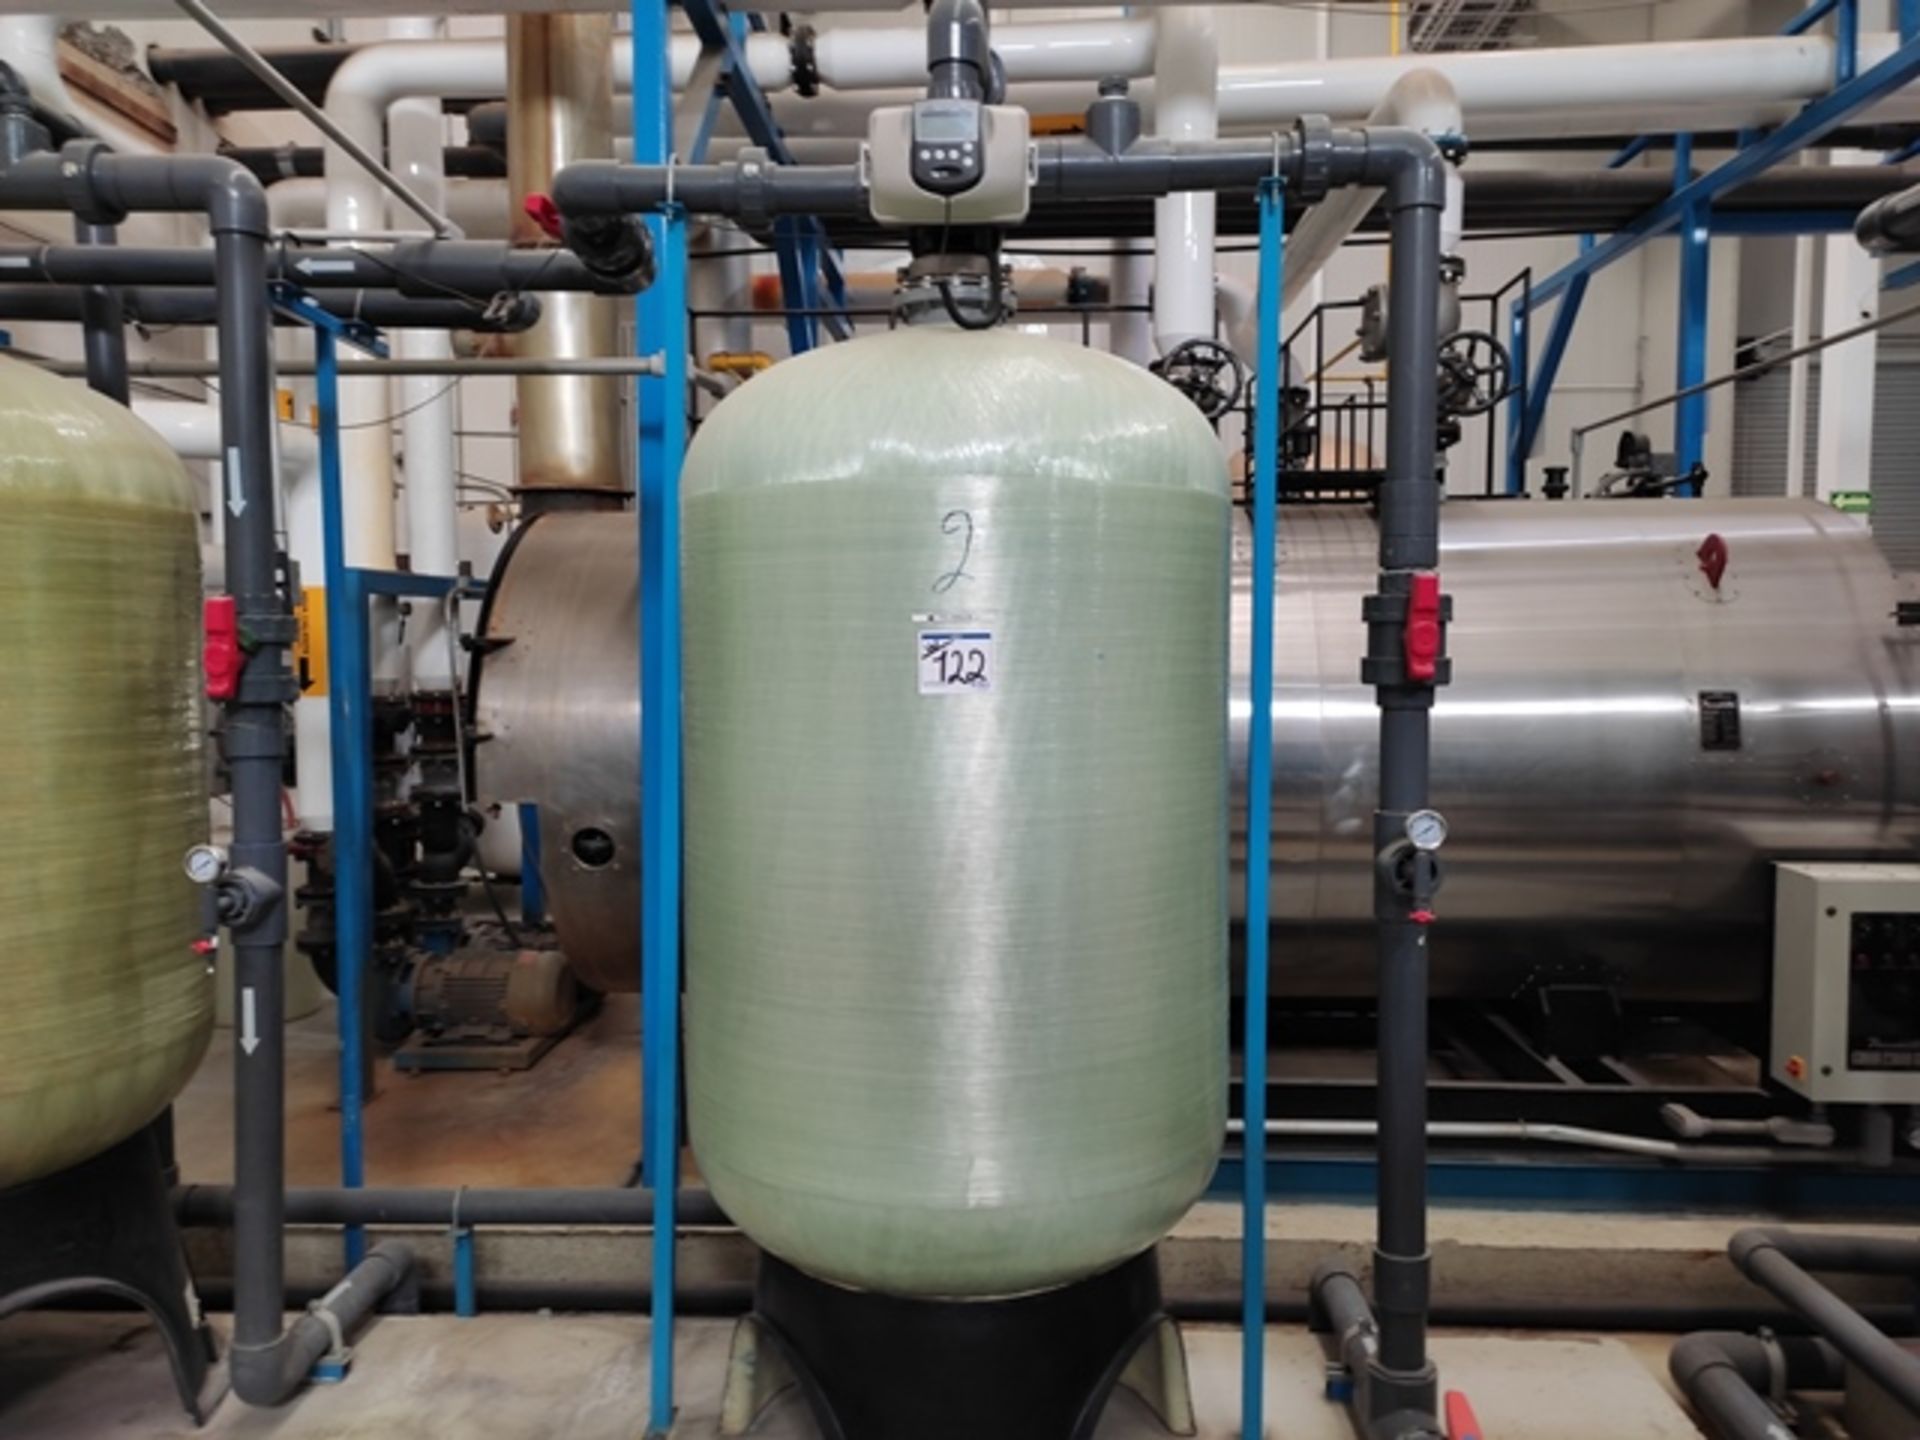 Water Treatment System (Lots 121a To 130) Consisting of: (1) Reverse Osmosis System - Image 26 of 114